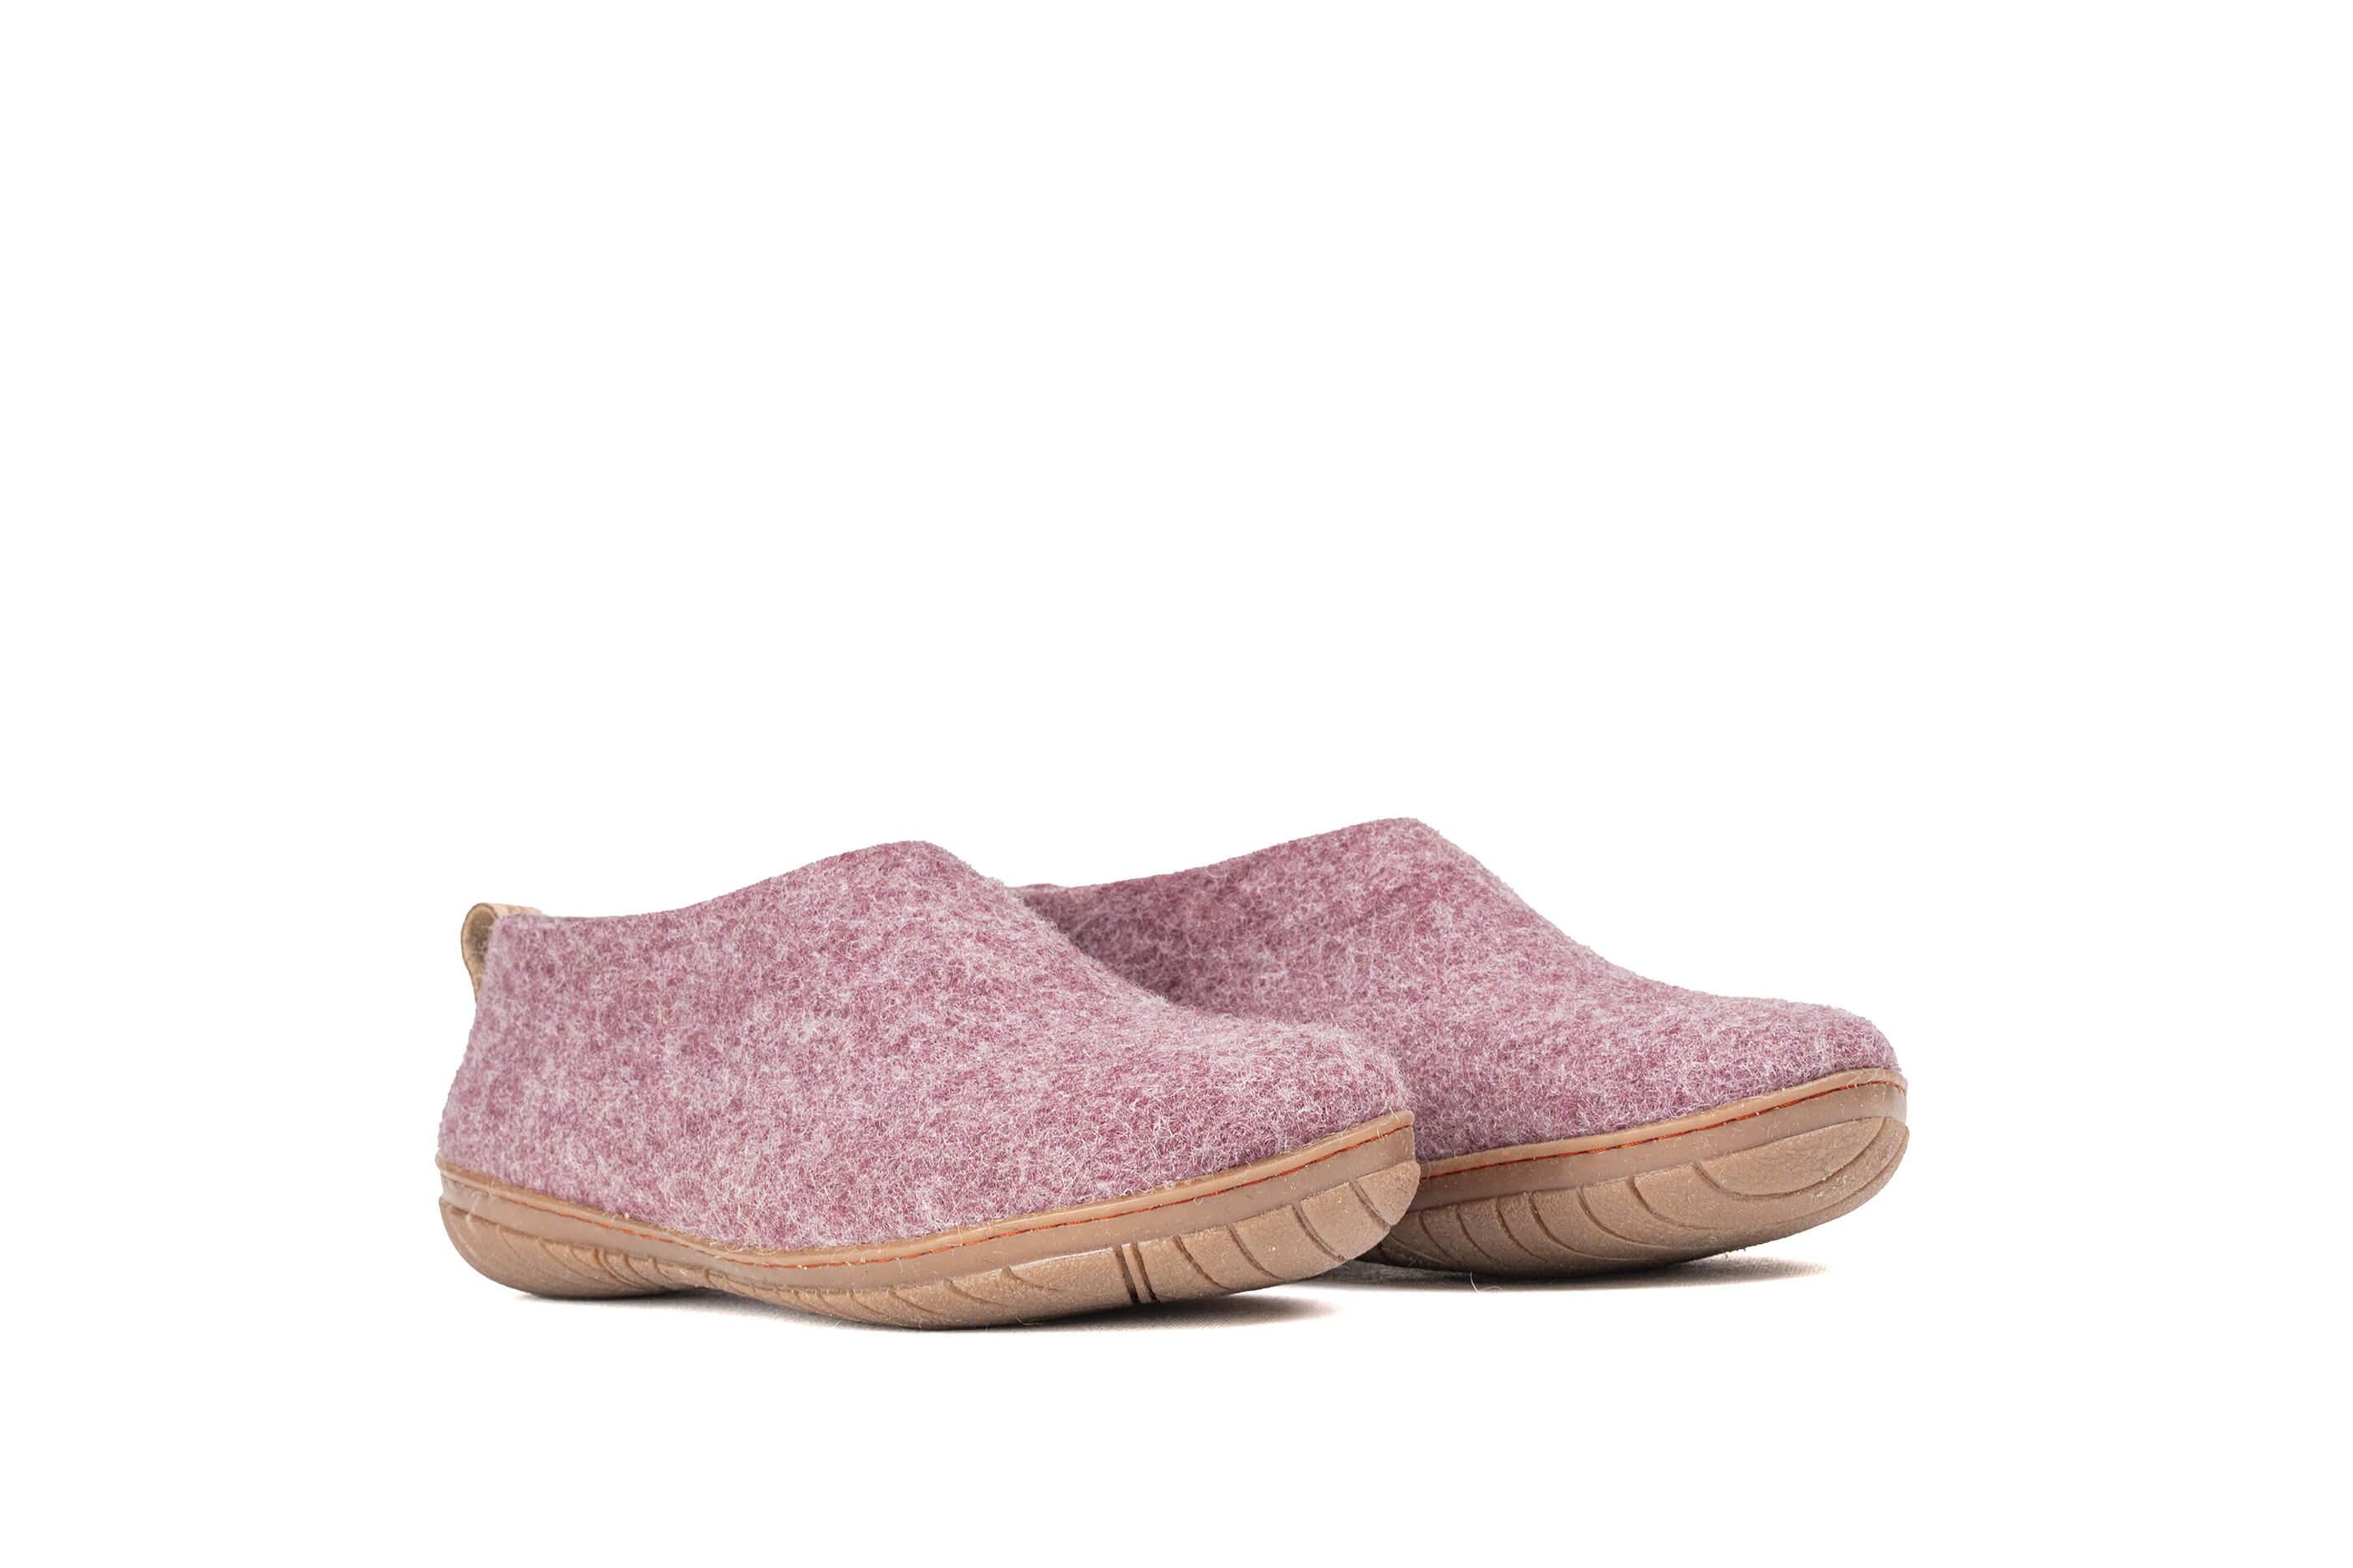 Outdoor Shoes With Rubber Sole - Lavender